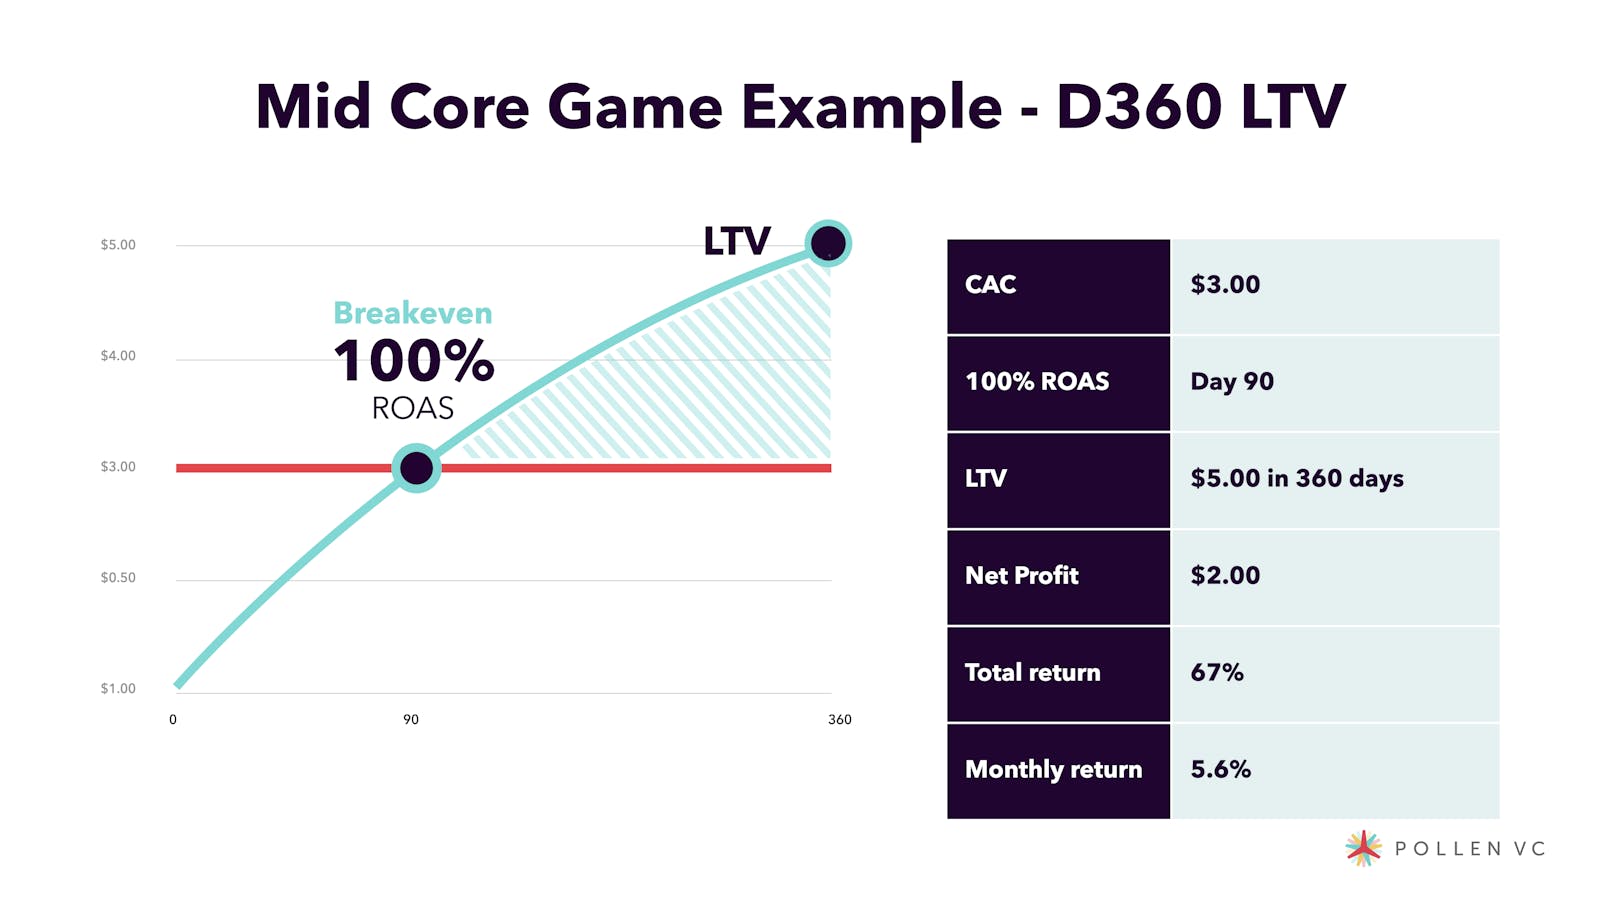 Mid Core Game Example - D360 LTV